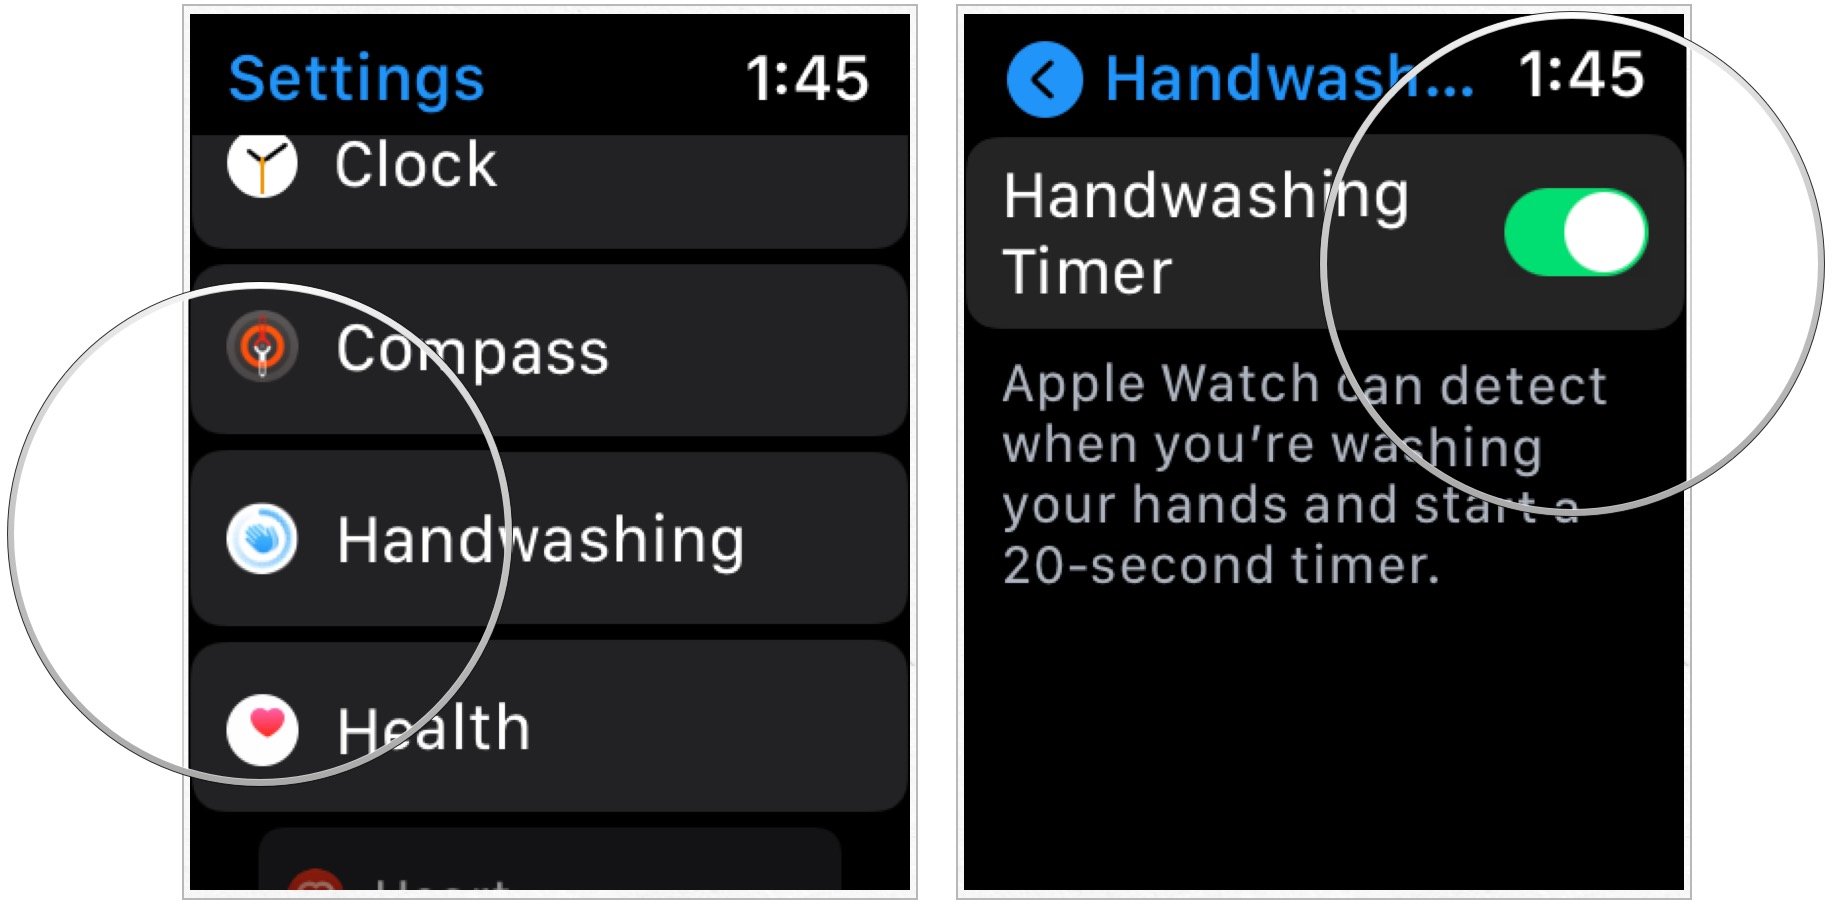 To use the hand washing feature on Apple Watch, scroll down, choose Handwashing, then toggle Handwashing Timer.